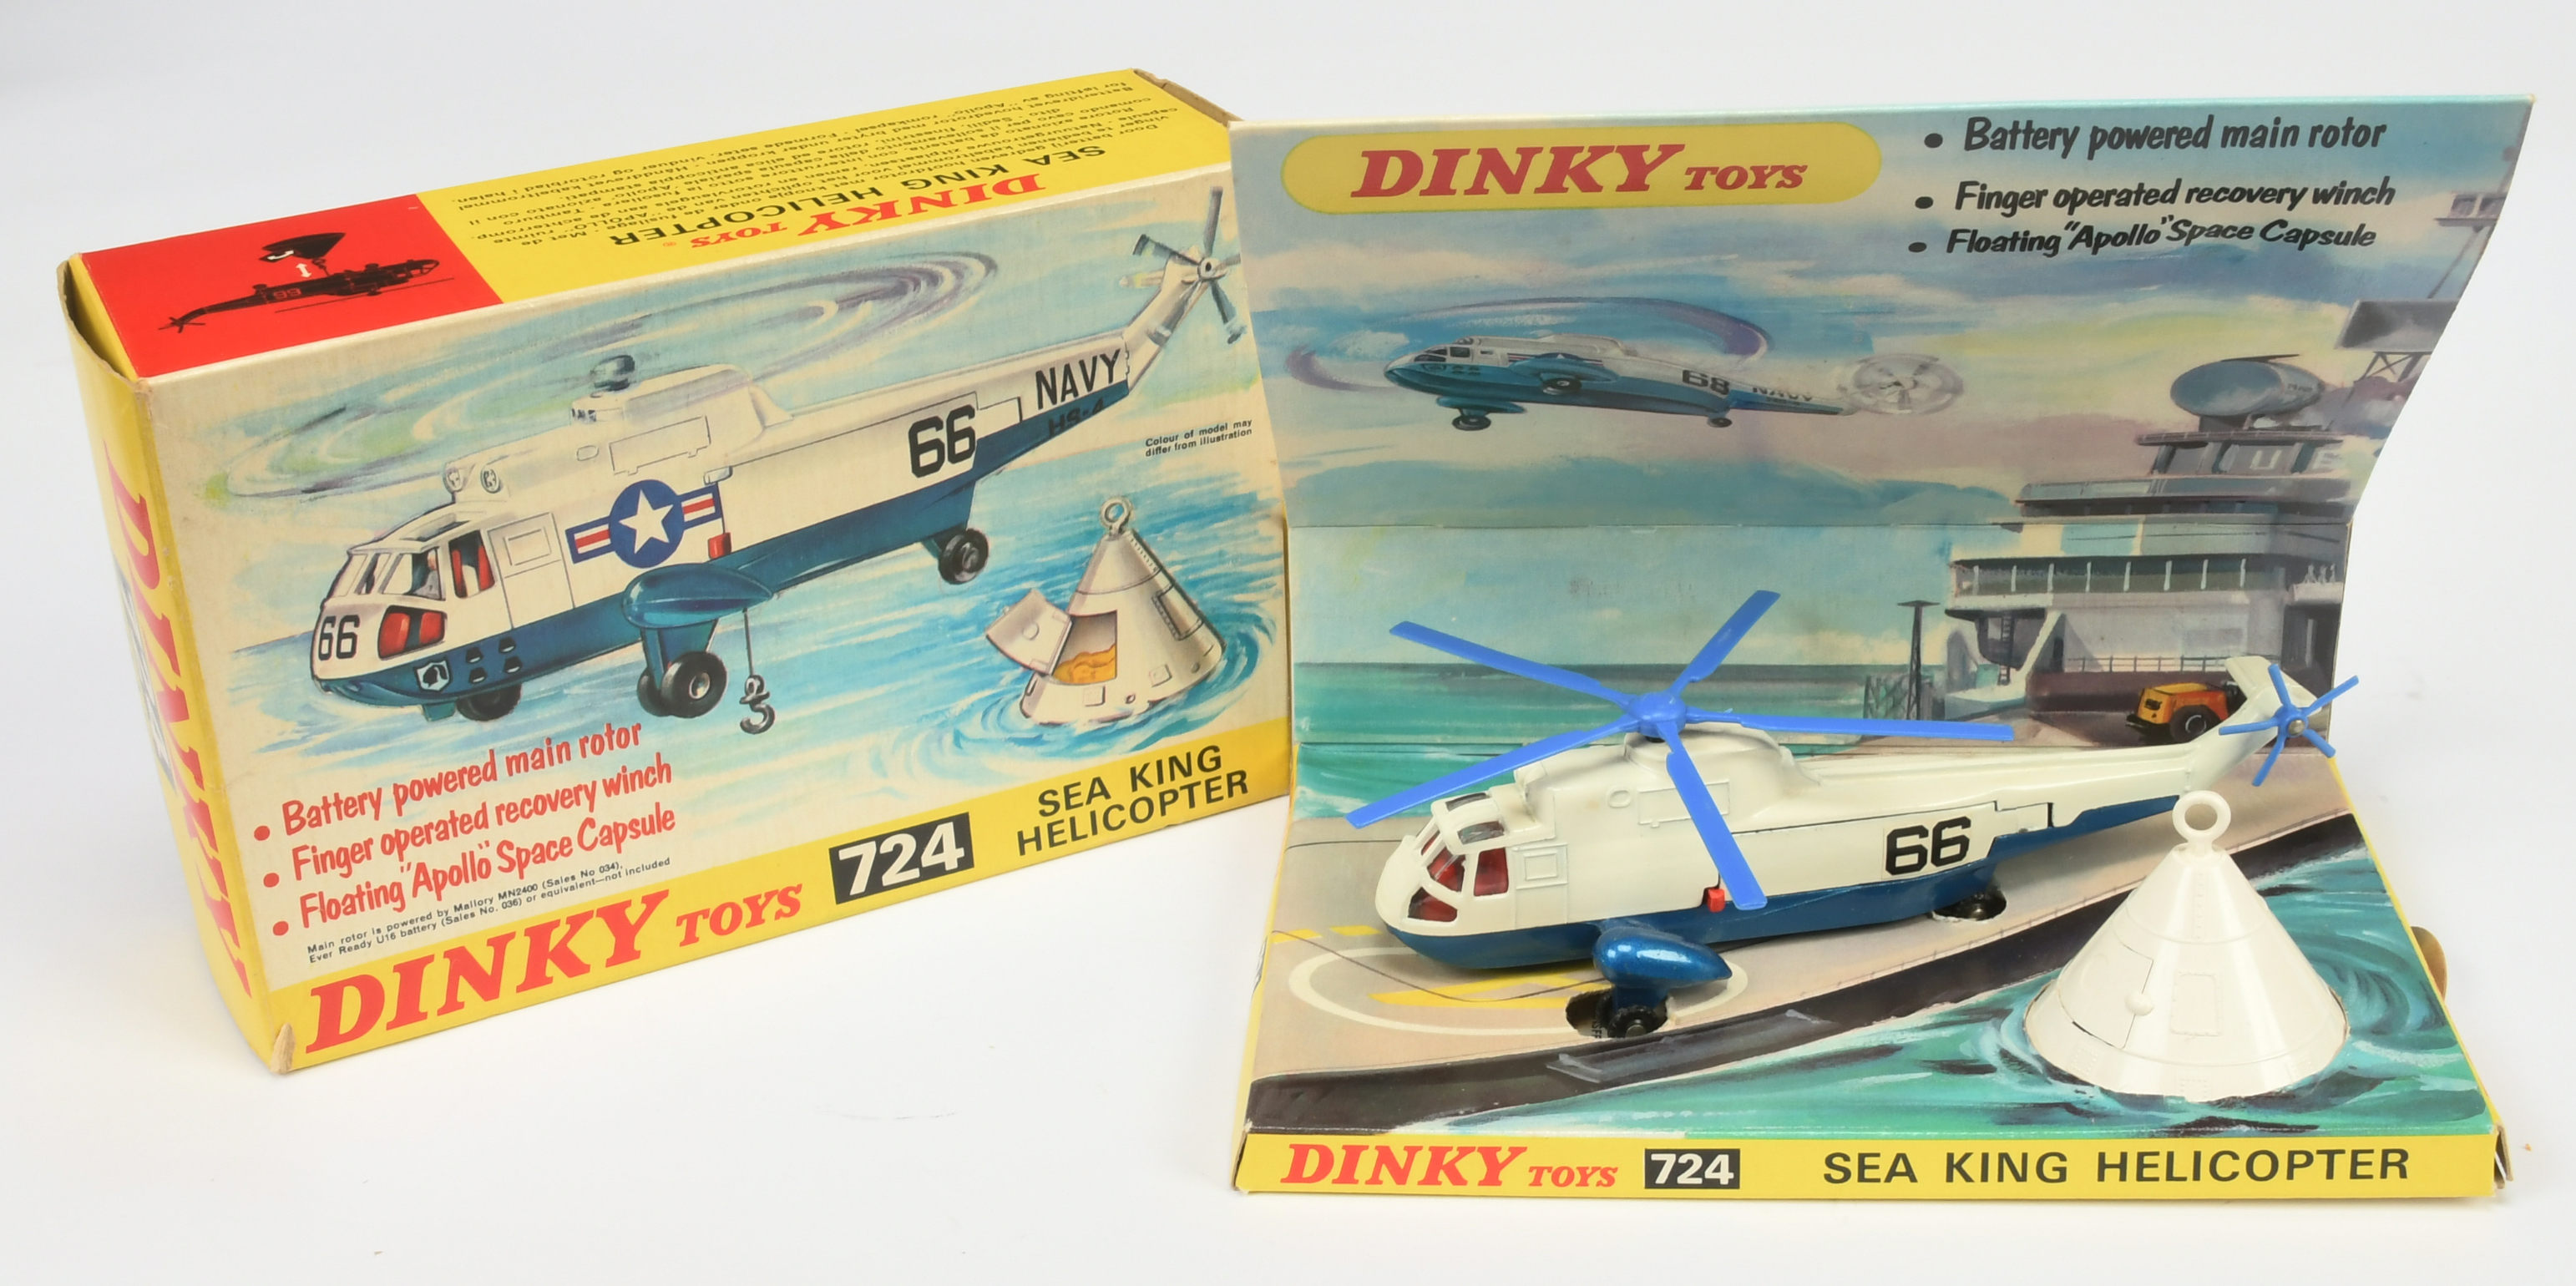 Dinky Toys Aircraft 724 Sea King Helicopter White and blue, red interior with No.66 